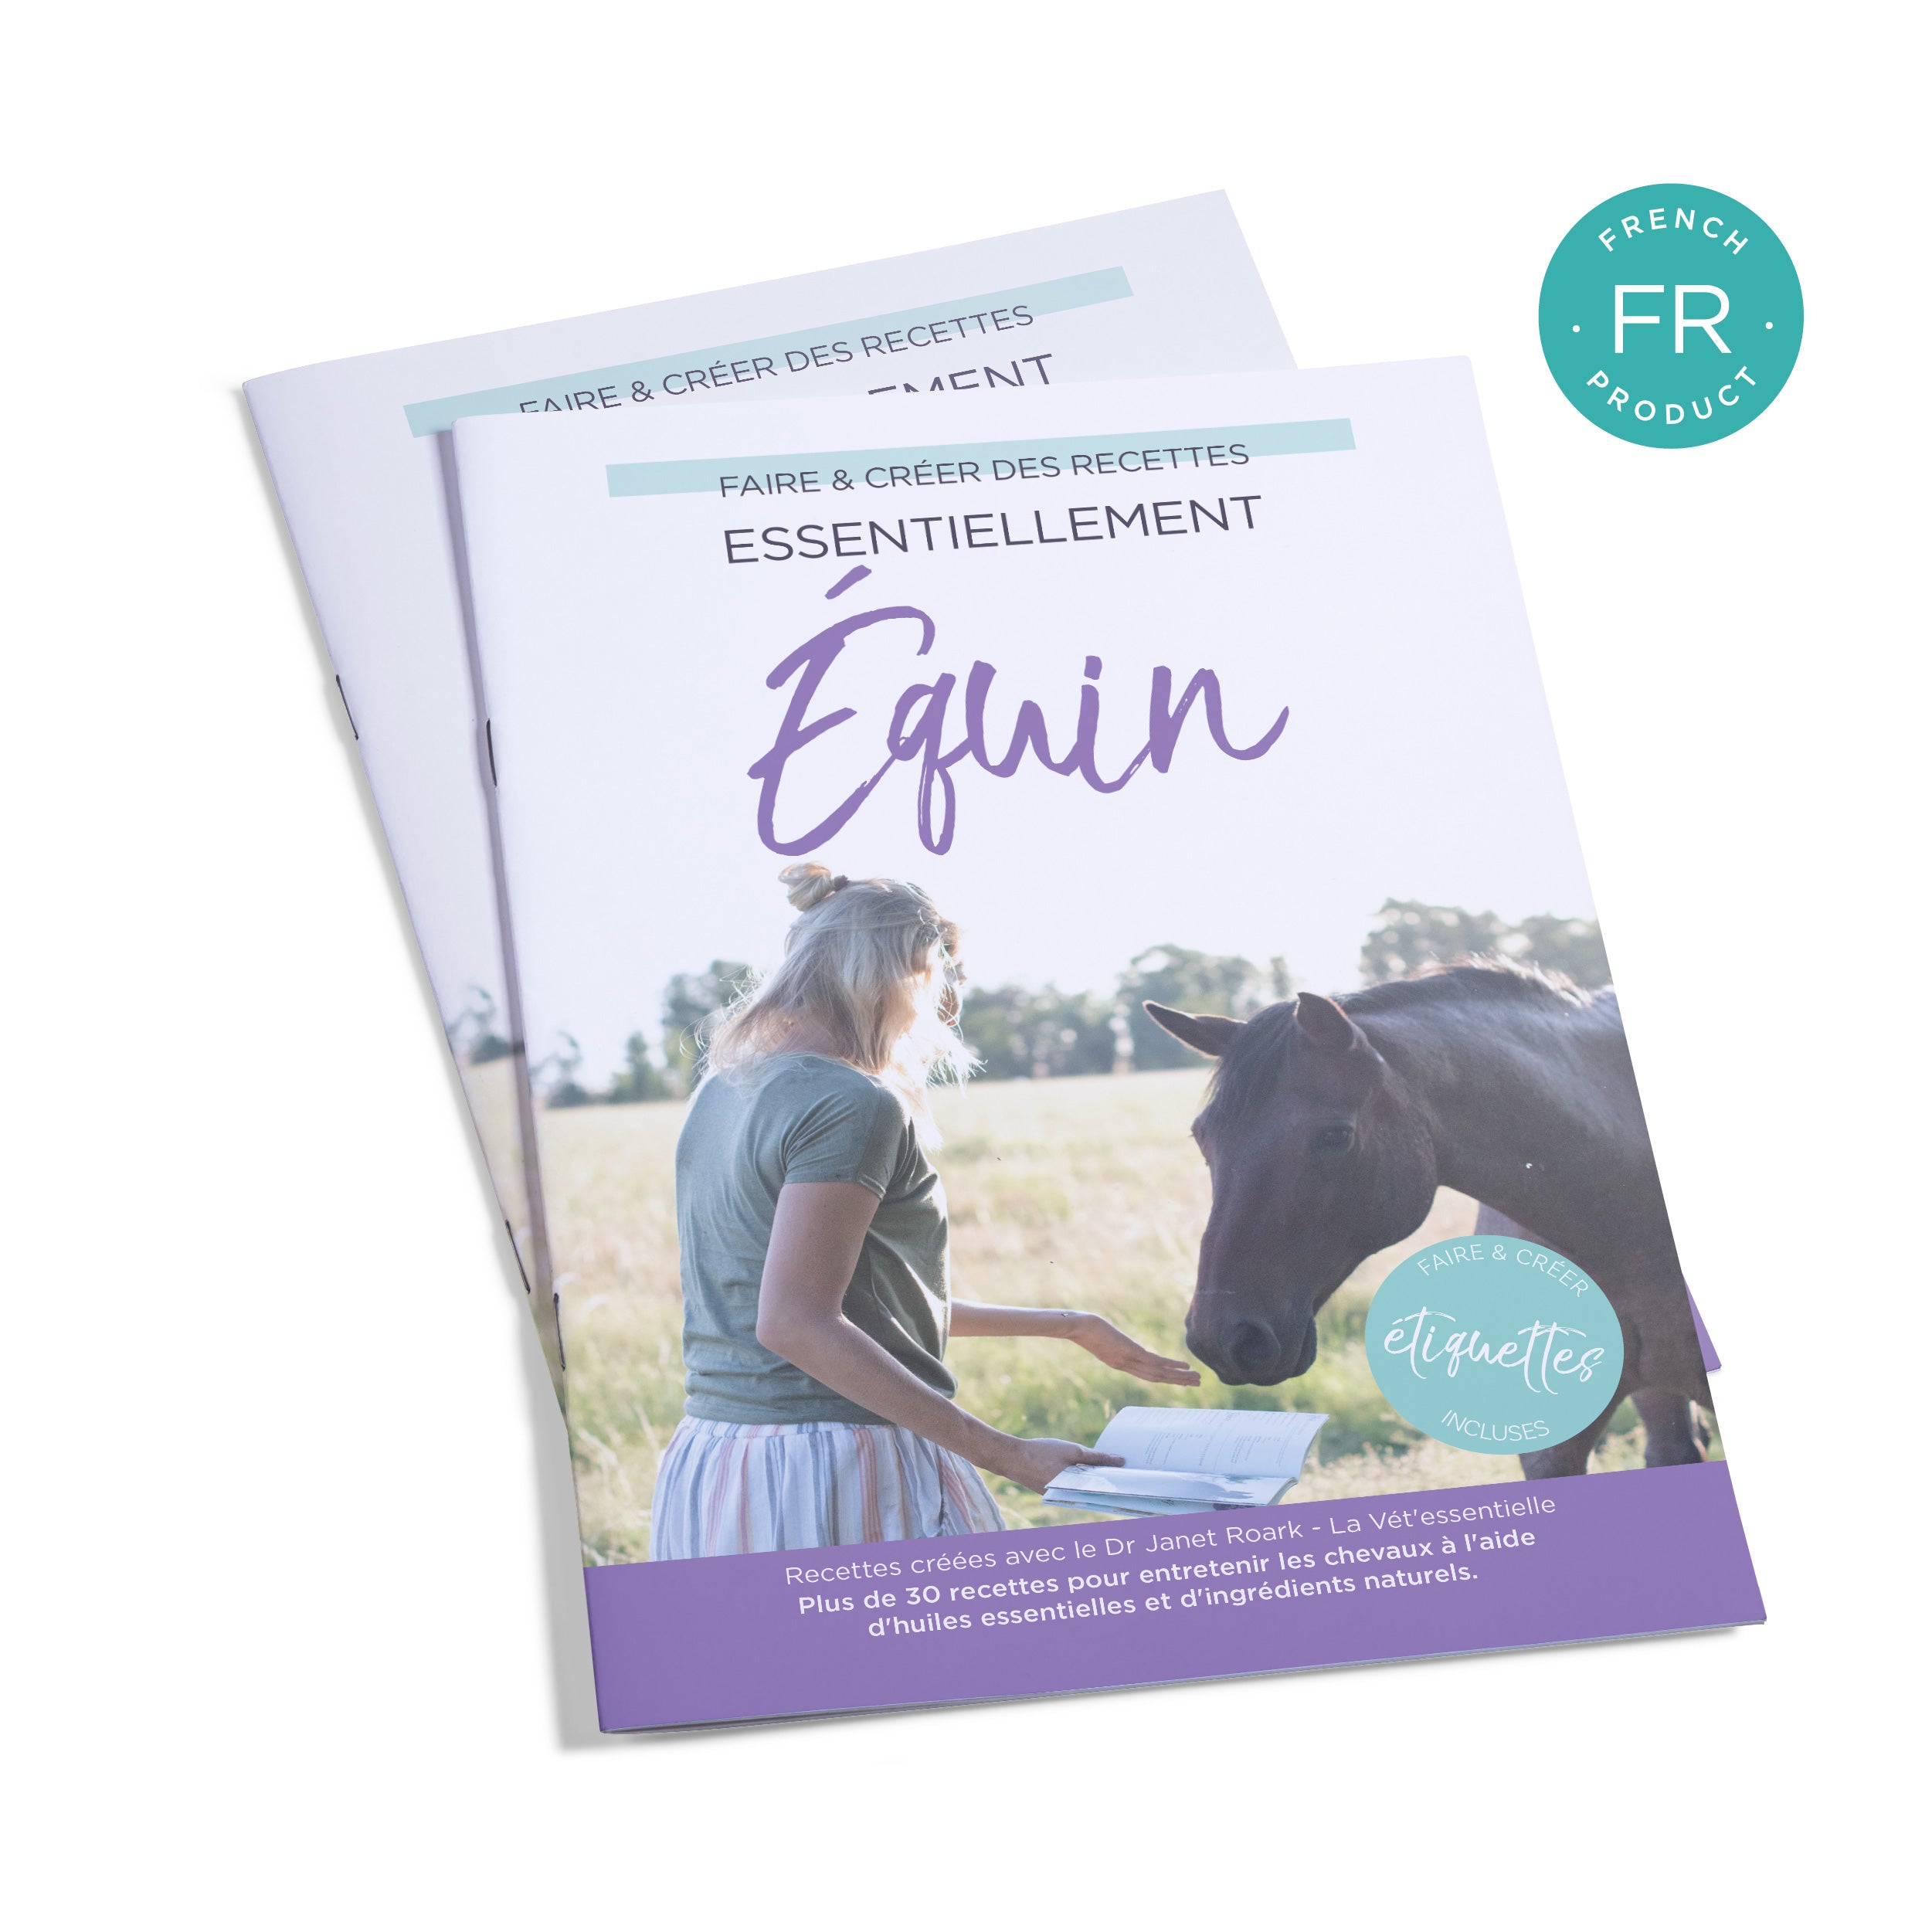 Essentially Equine Make & Create Recipe Book (includes over 40 labels) with Dr Janet Roark - FRENCH